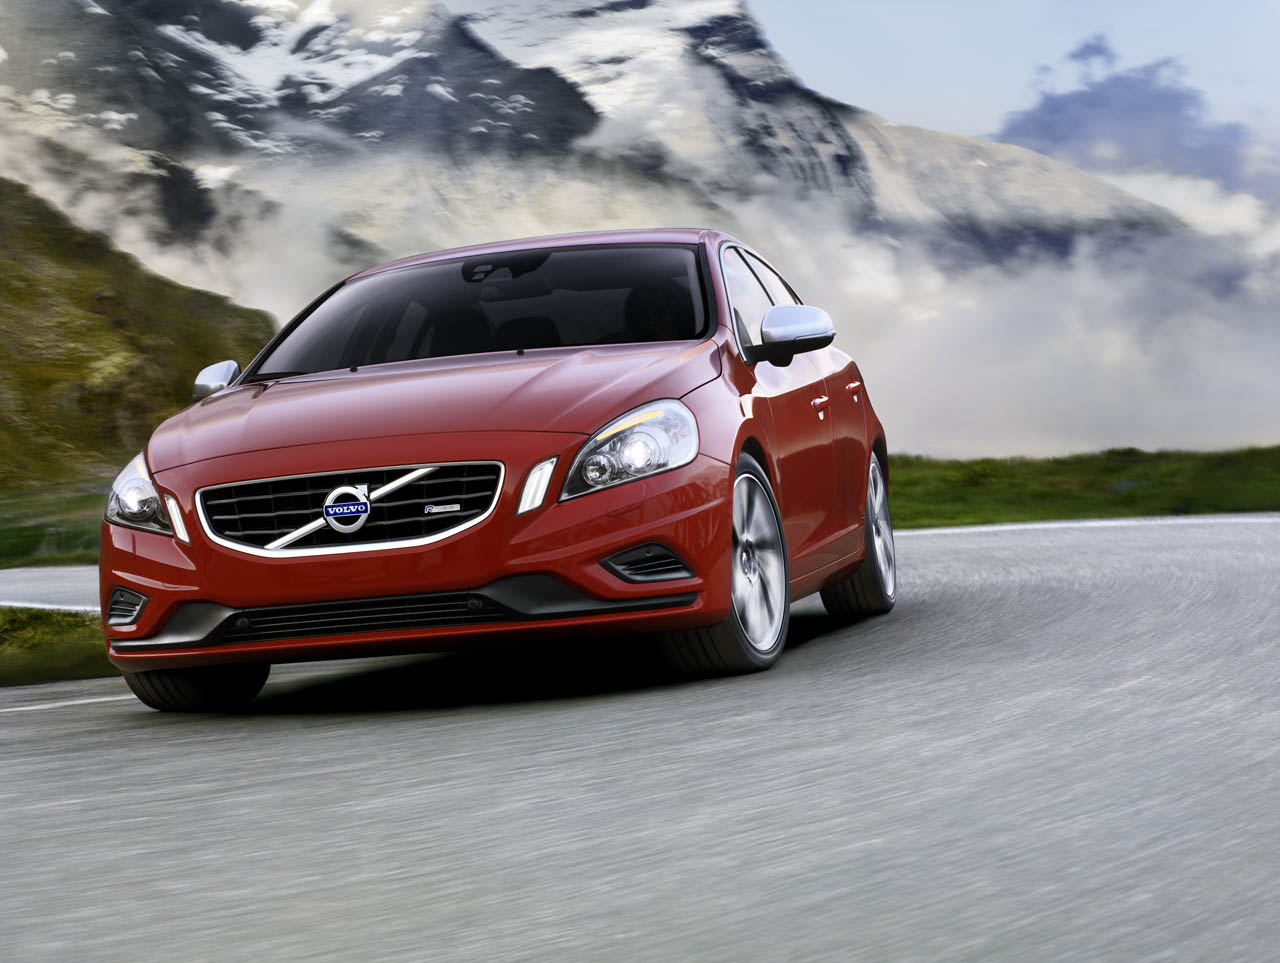 Volvo Boosts Power With R Design S60  XC60 2012   Auto Car